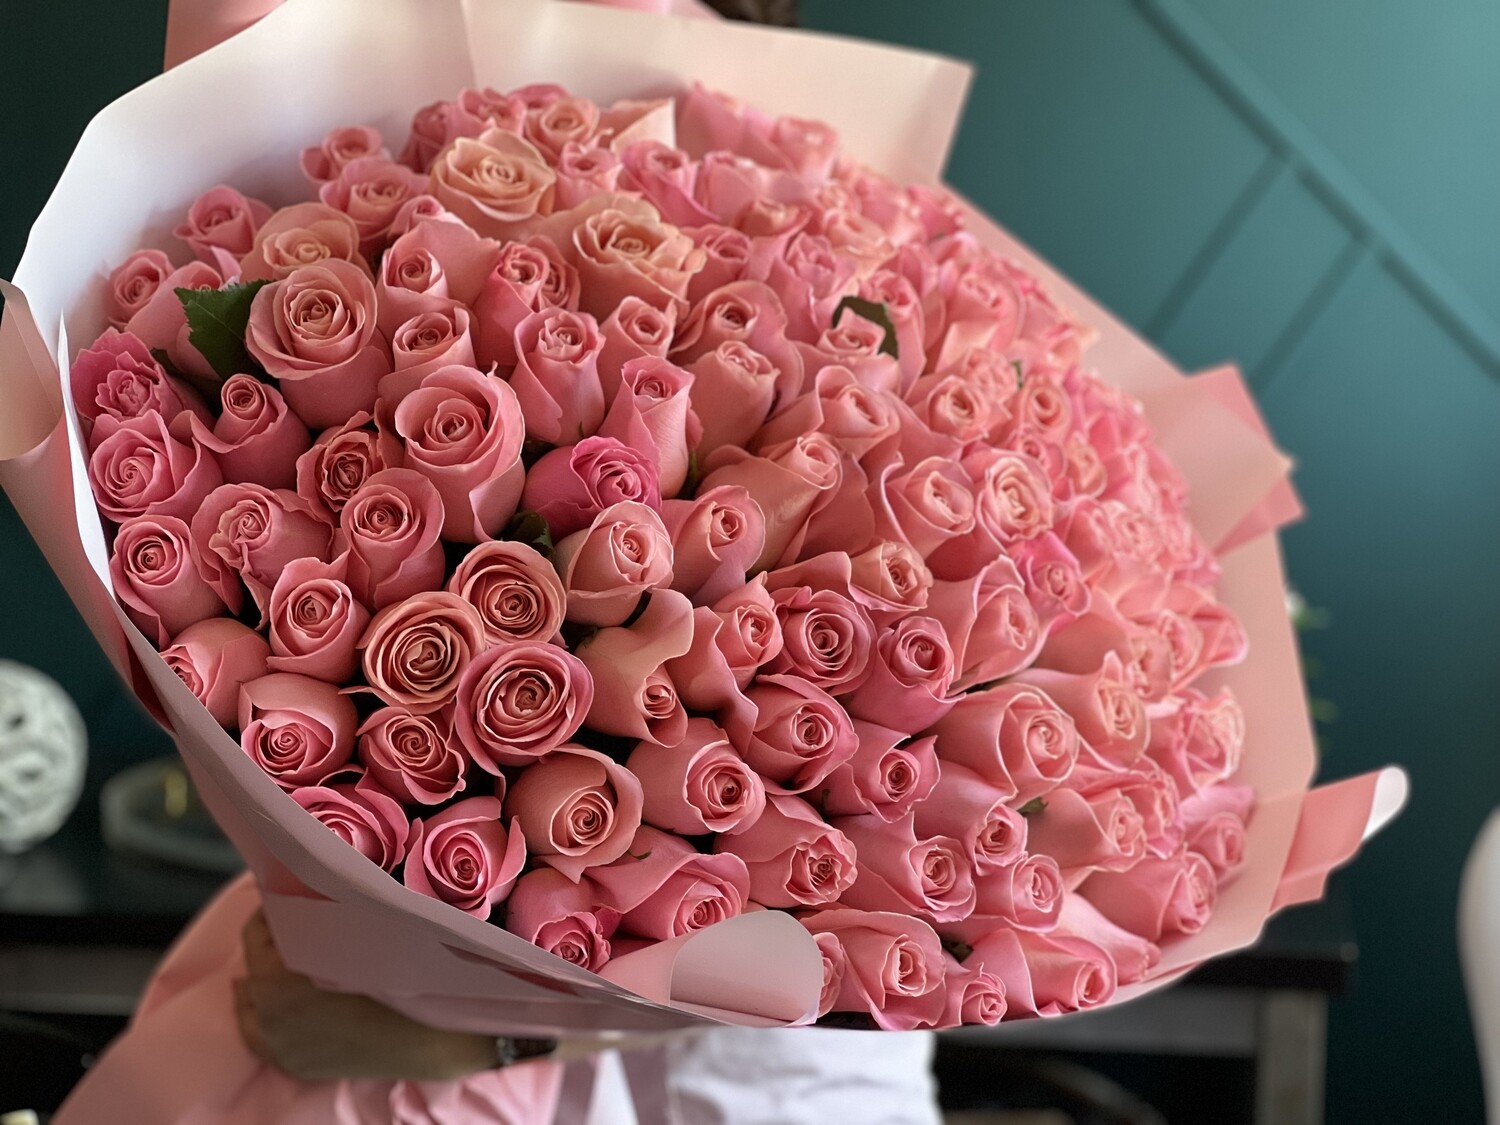 150 BLUSH PINK ROSES HAND-CRAFTED BOUQUET